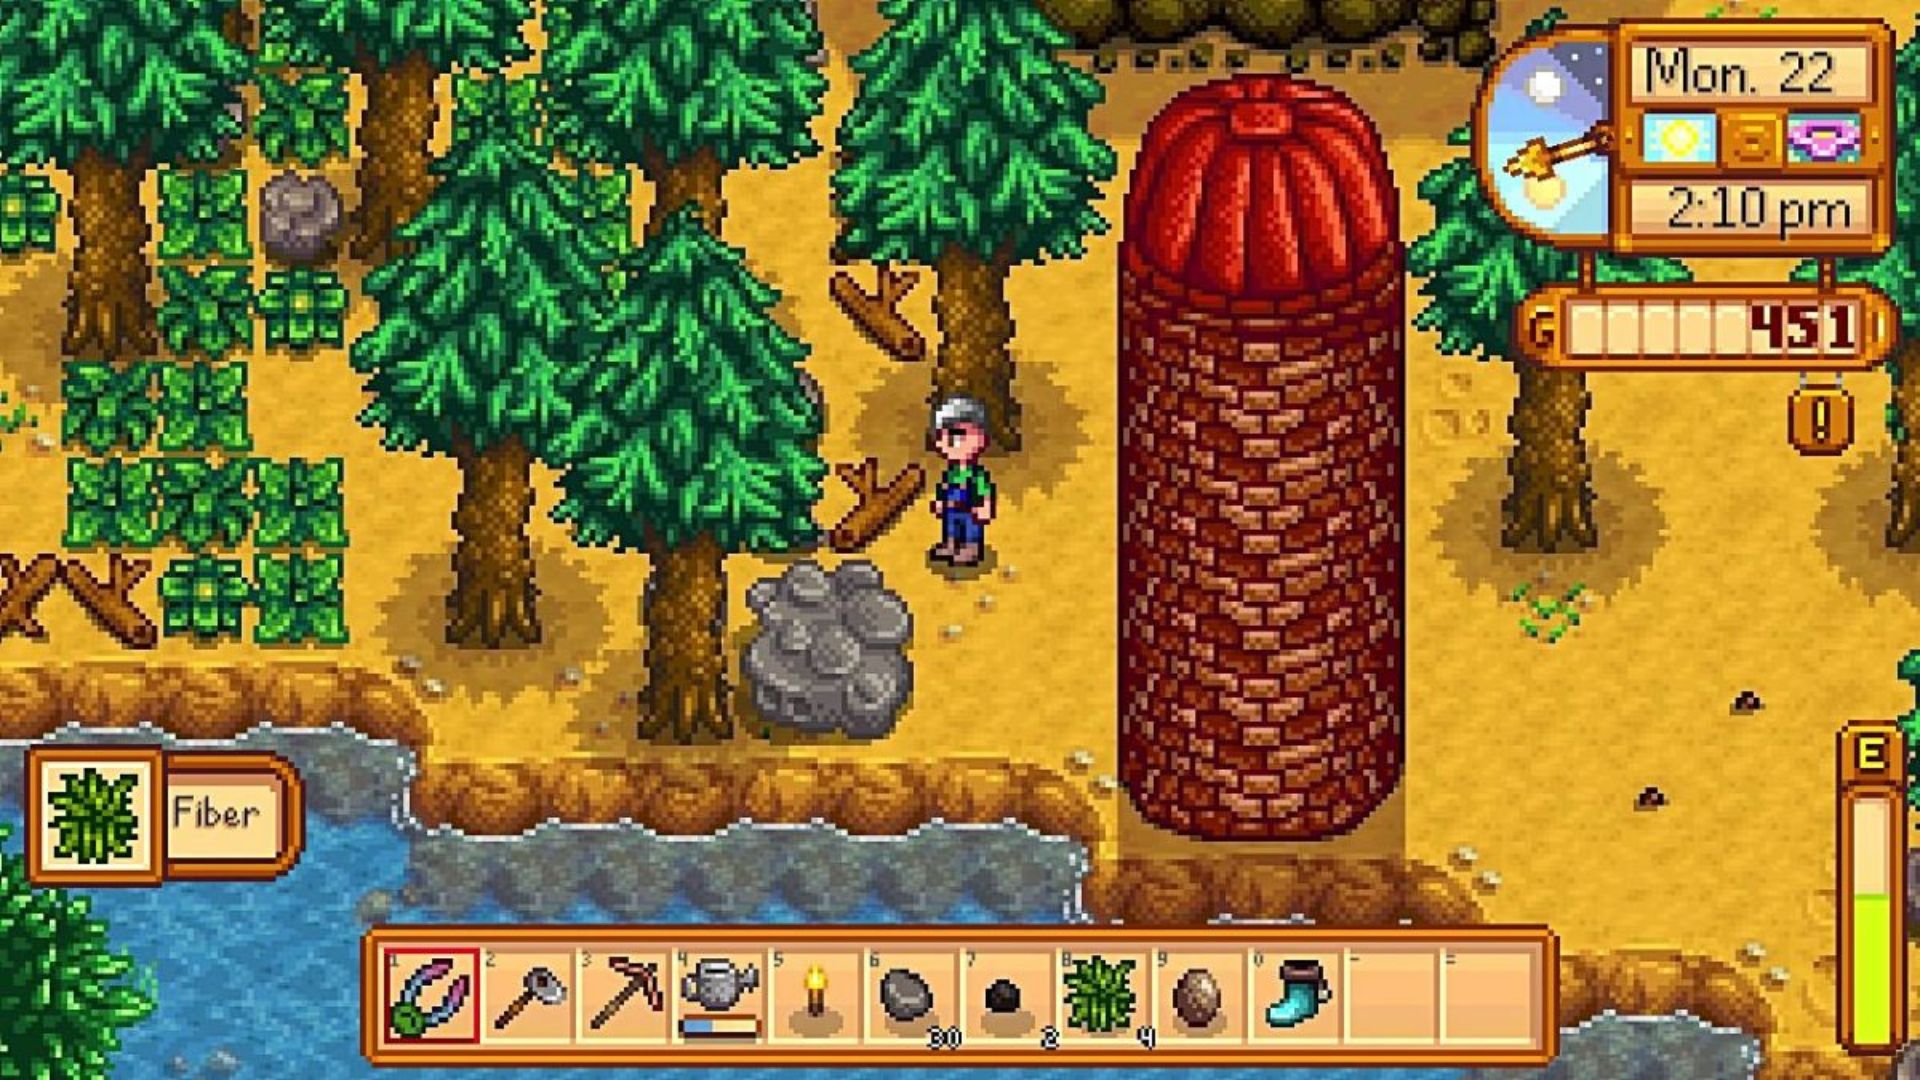 Use clay to build a silo early in your farm in Stardew Valley.